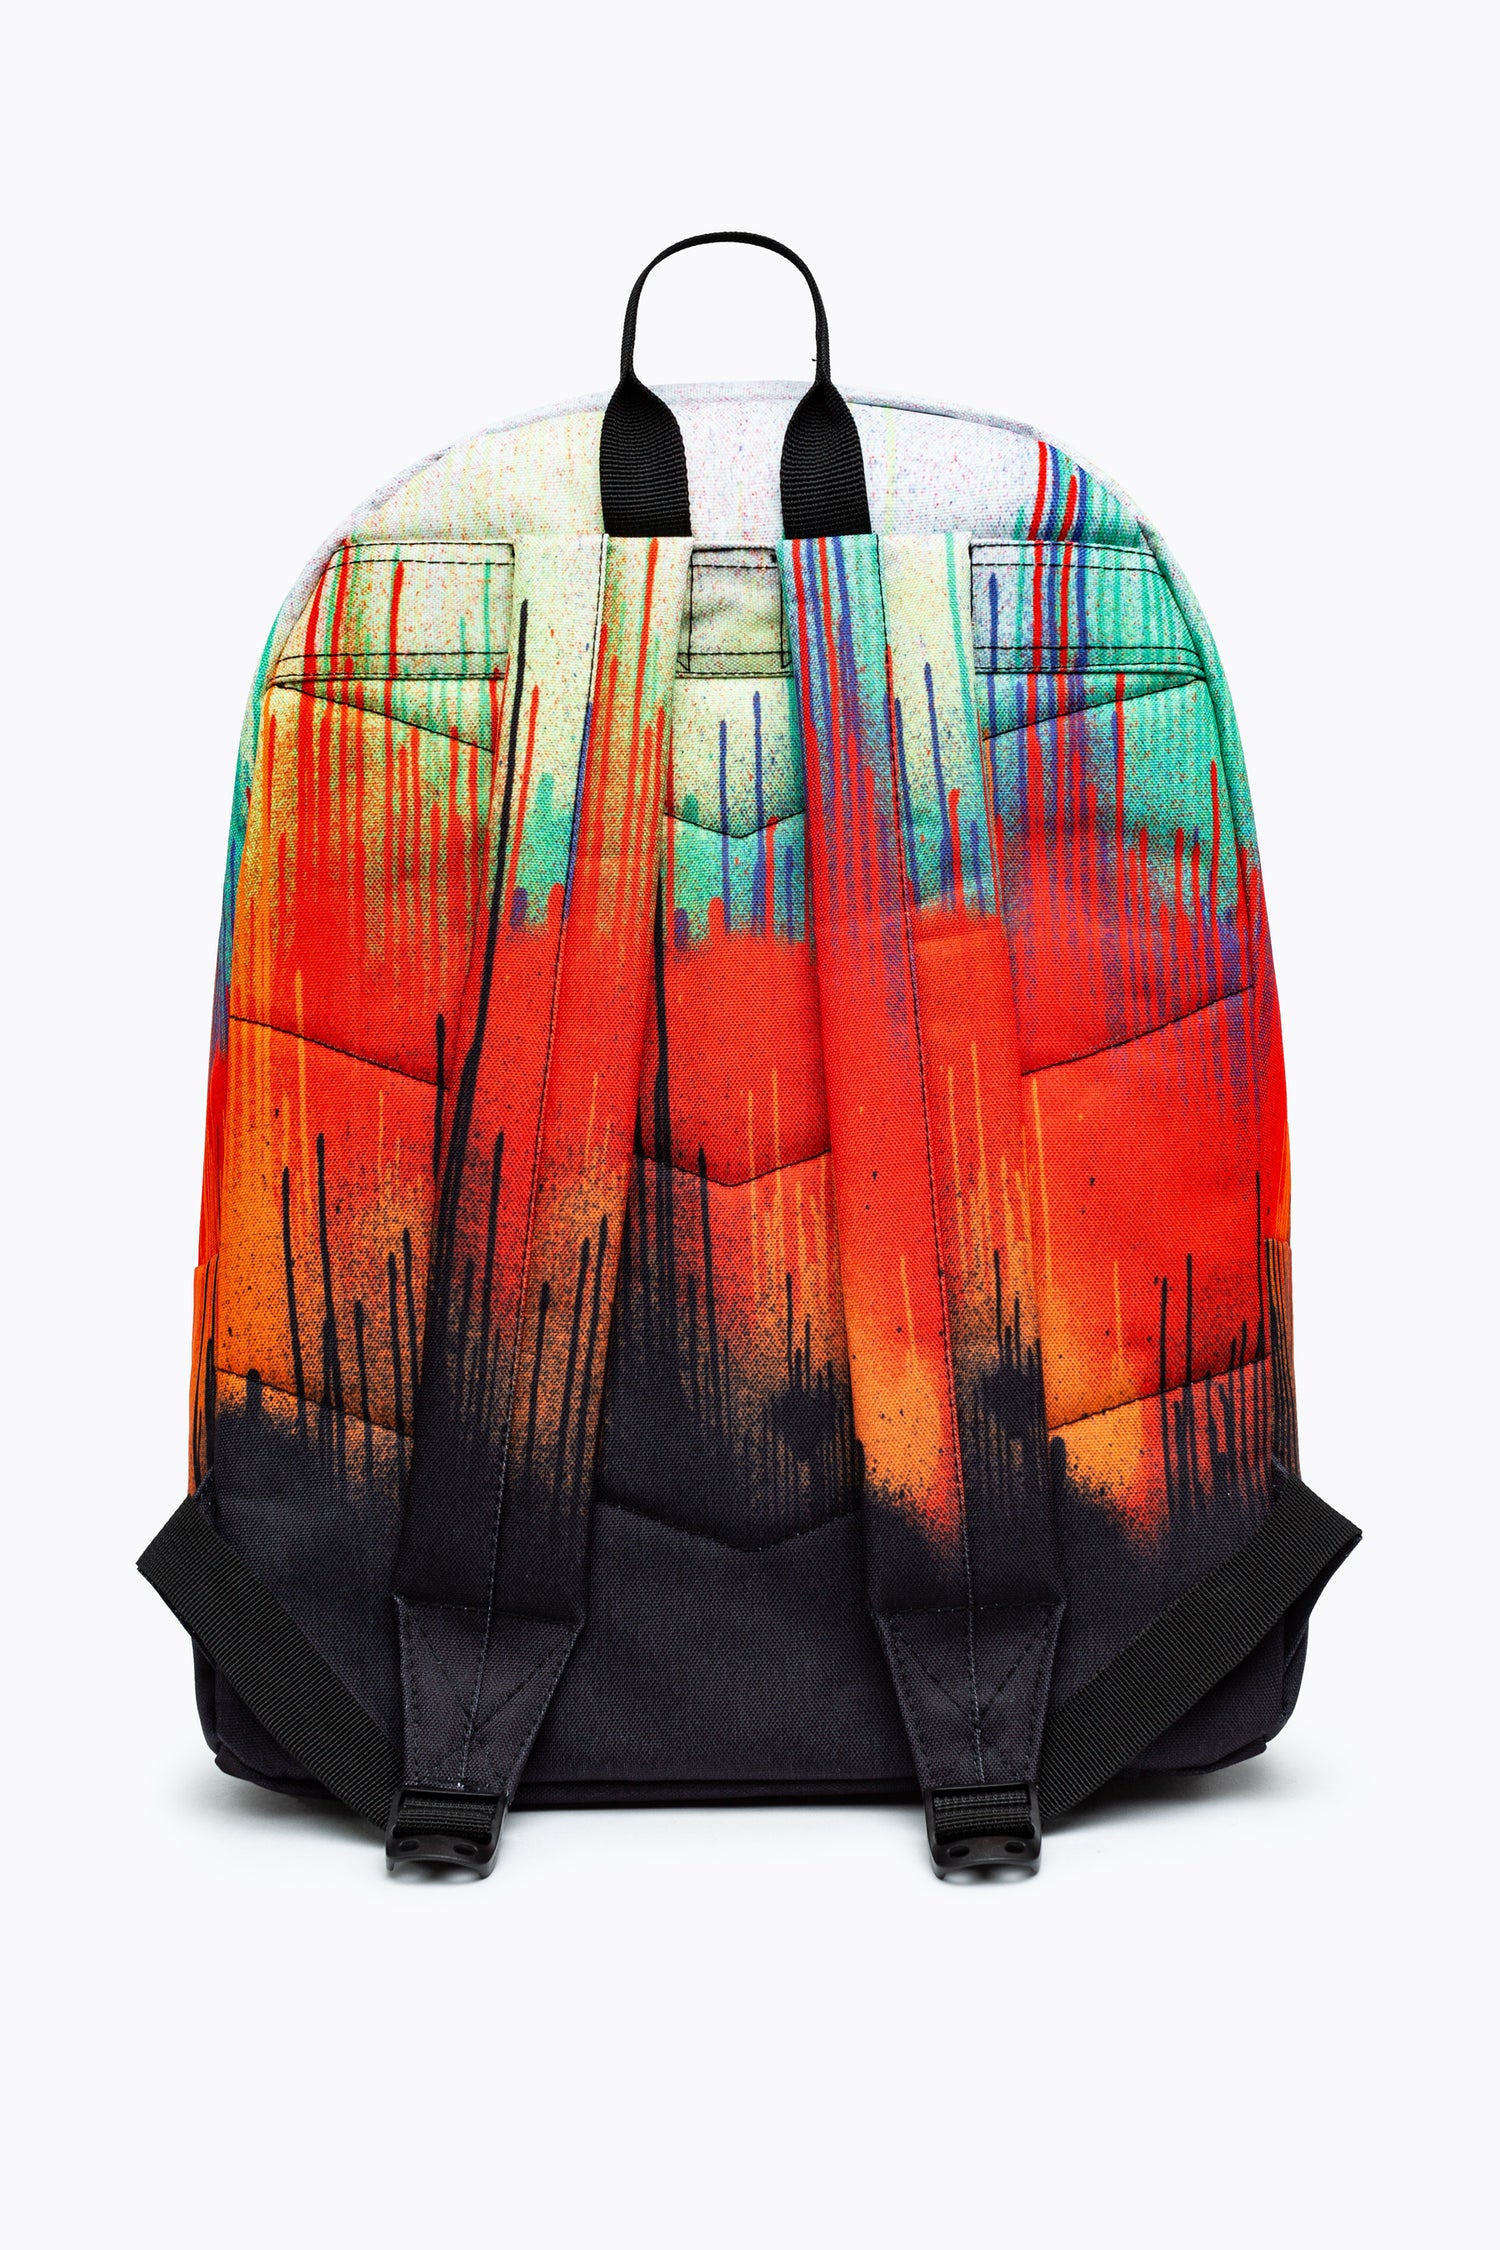 HYPE UNISEX RED MULTI DRIP CREST BACKPACK